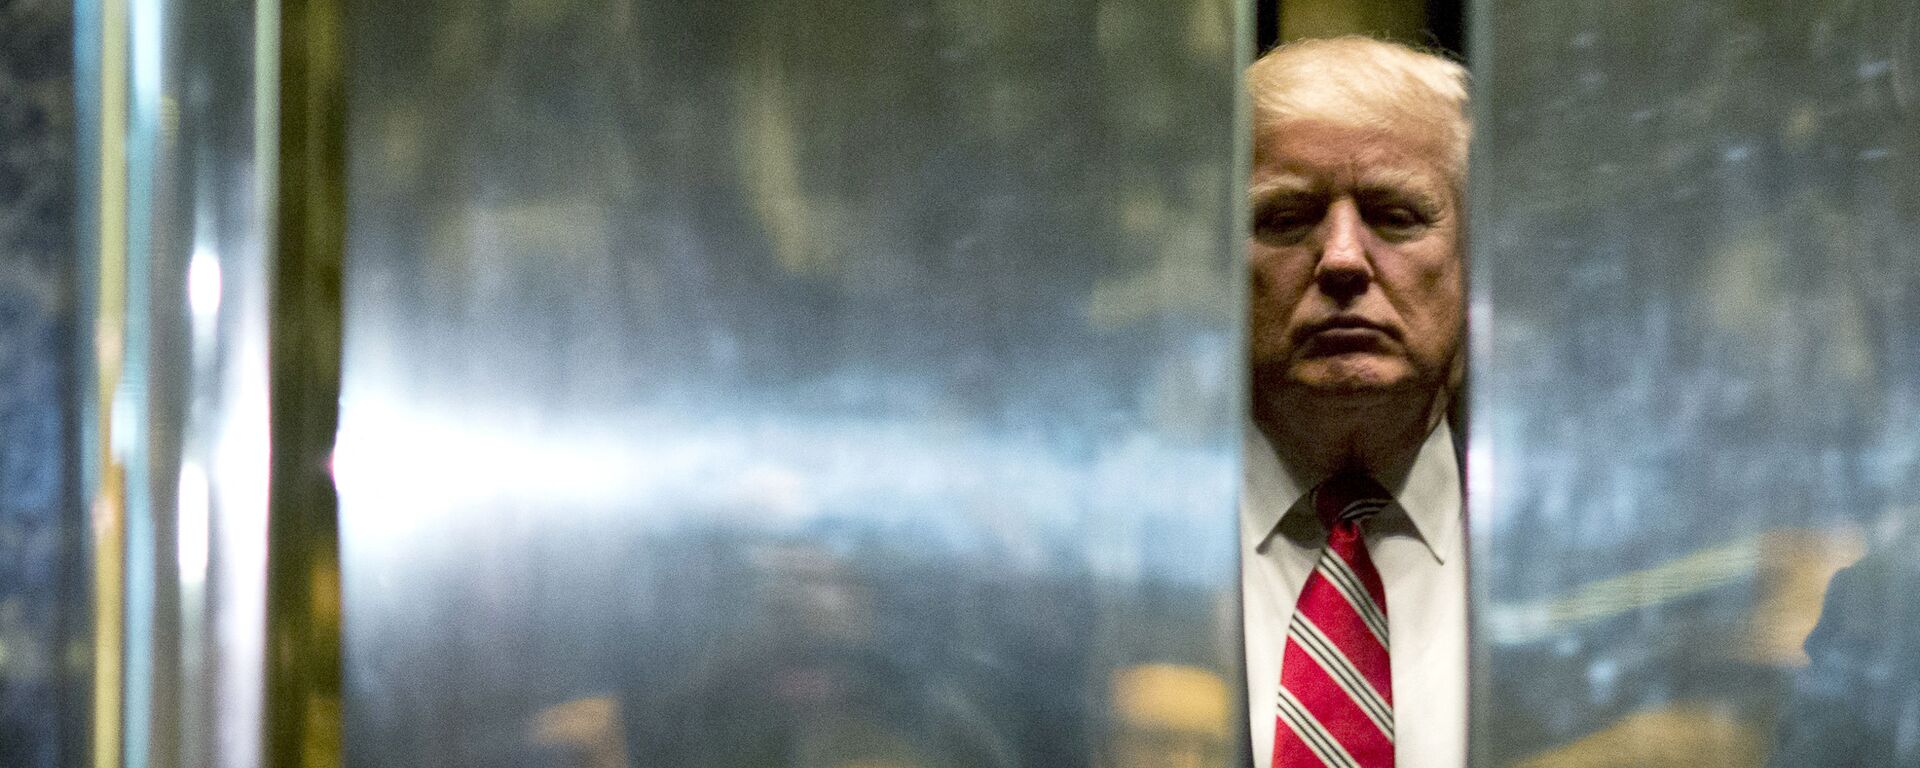 In this file photo taken on January 16, 2017 US President-elect Donald Trump boards the elevator after escorting Martin Luther King III to the lobby after meetings at Trump Tower in New York City. - The Trump Organization is being investigated in a criminal capacity as New York prosecutors advance their probe into former president Donald Trump's business dealings, the state attorney general announced Tuesday. We have informed the Trump Organization that our investigation into the organization is no longer purely civil in nature, a spokesman for Attorney General Letitia James' office said. We are now actively investigating the Trump Organization in a criminal capacity, along with the Manhattan DA. - Sputnik International, 1920, 23.09.2022